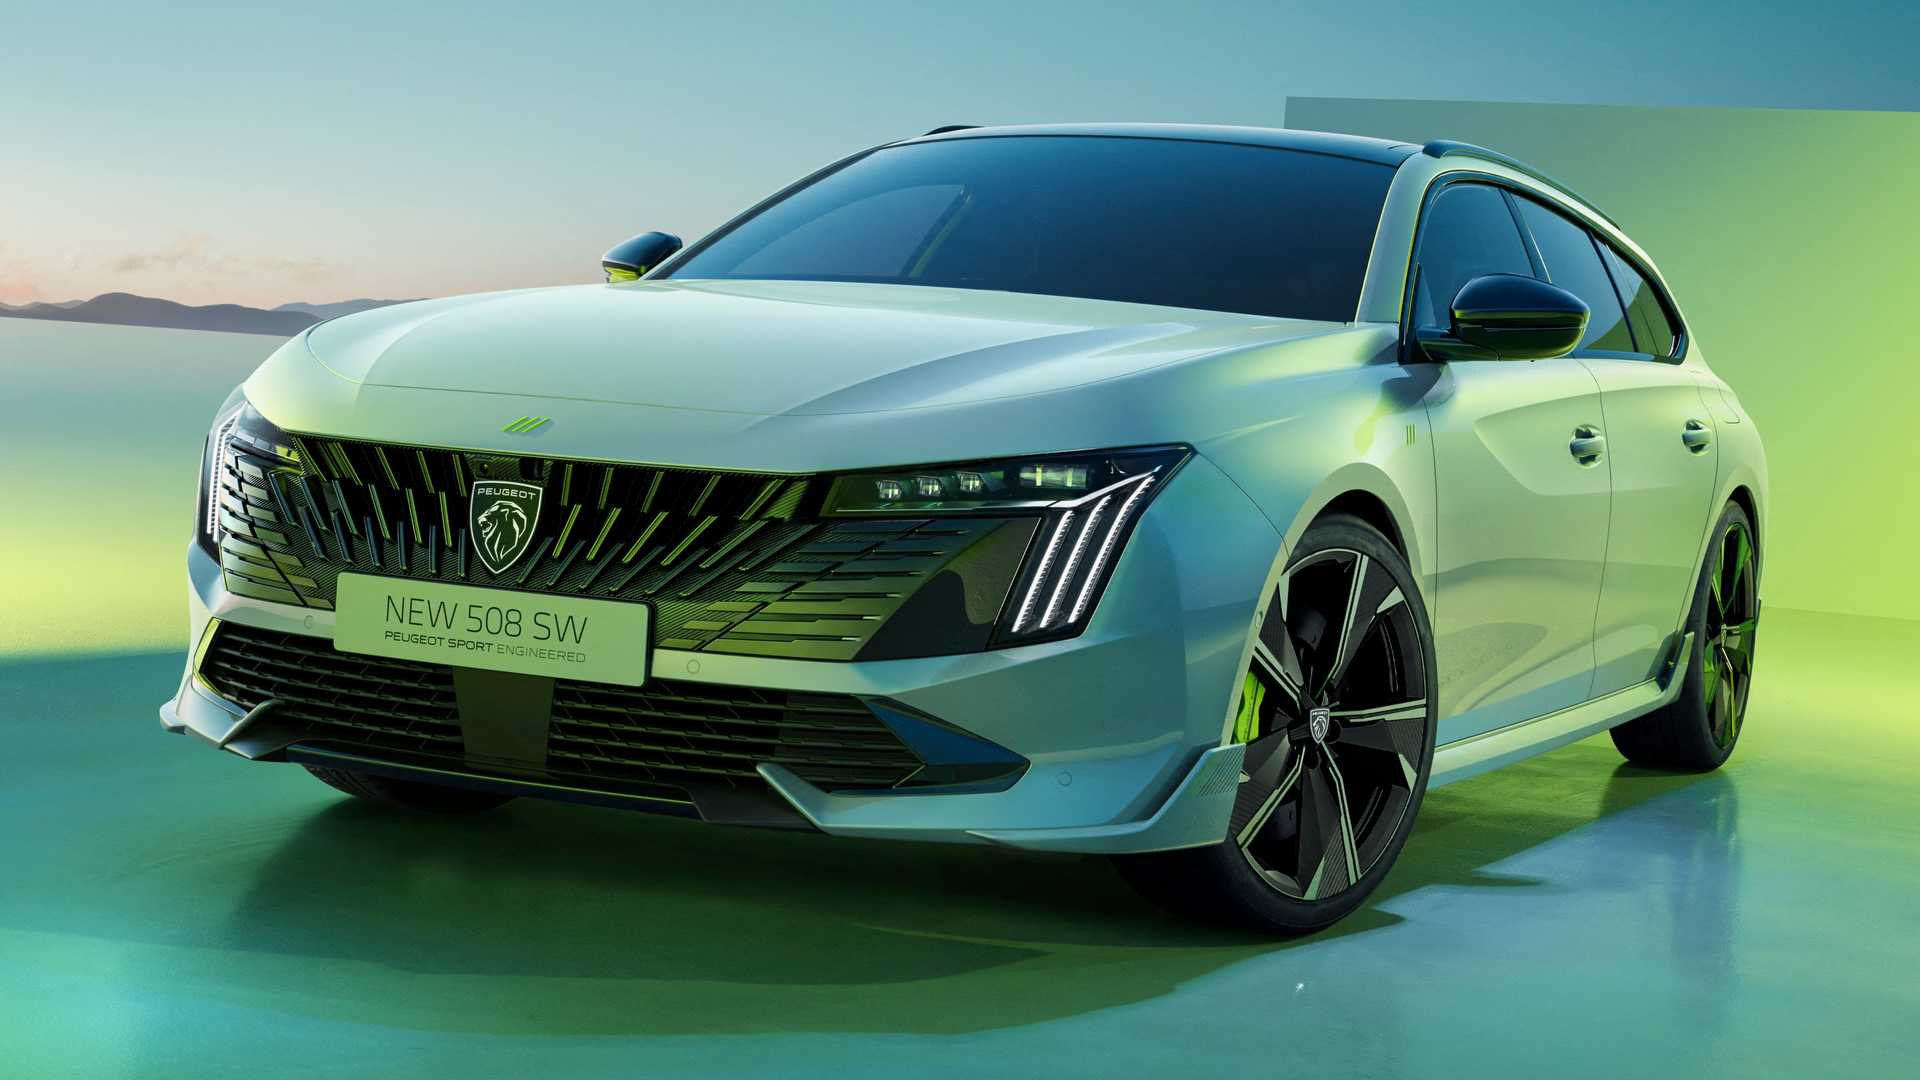 Peugeot Unveils Updated 508 Sedan and SW with New Design and Technology